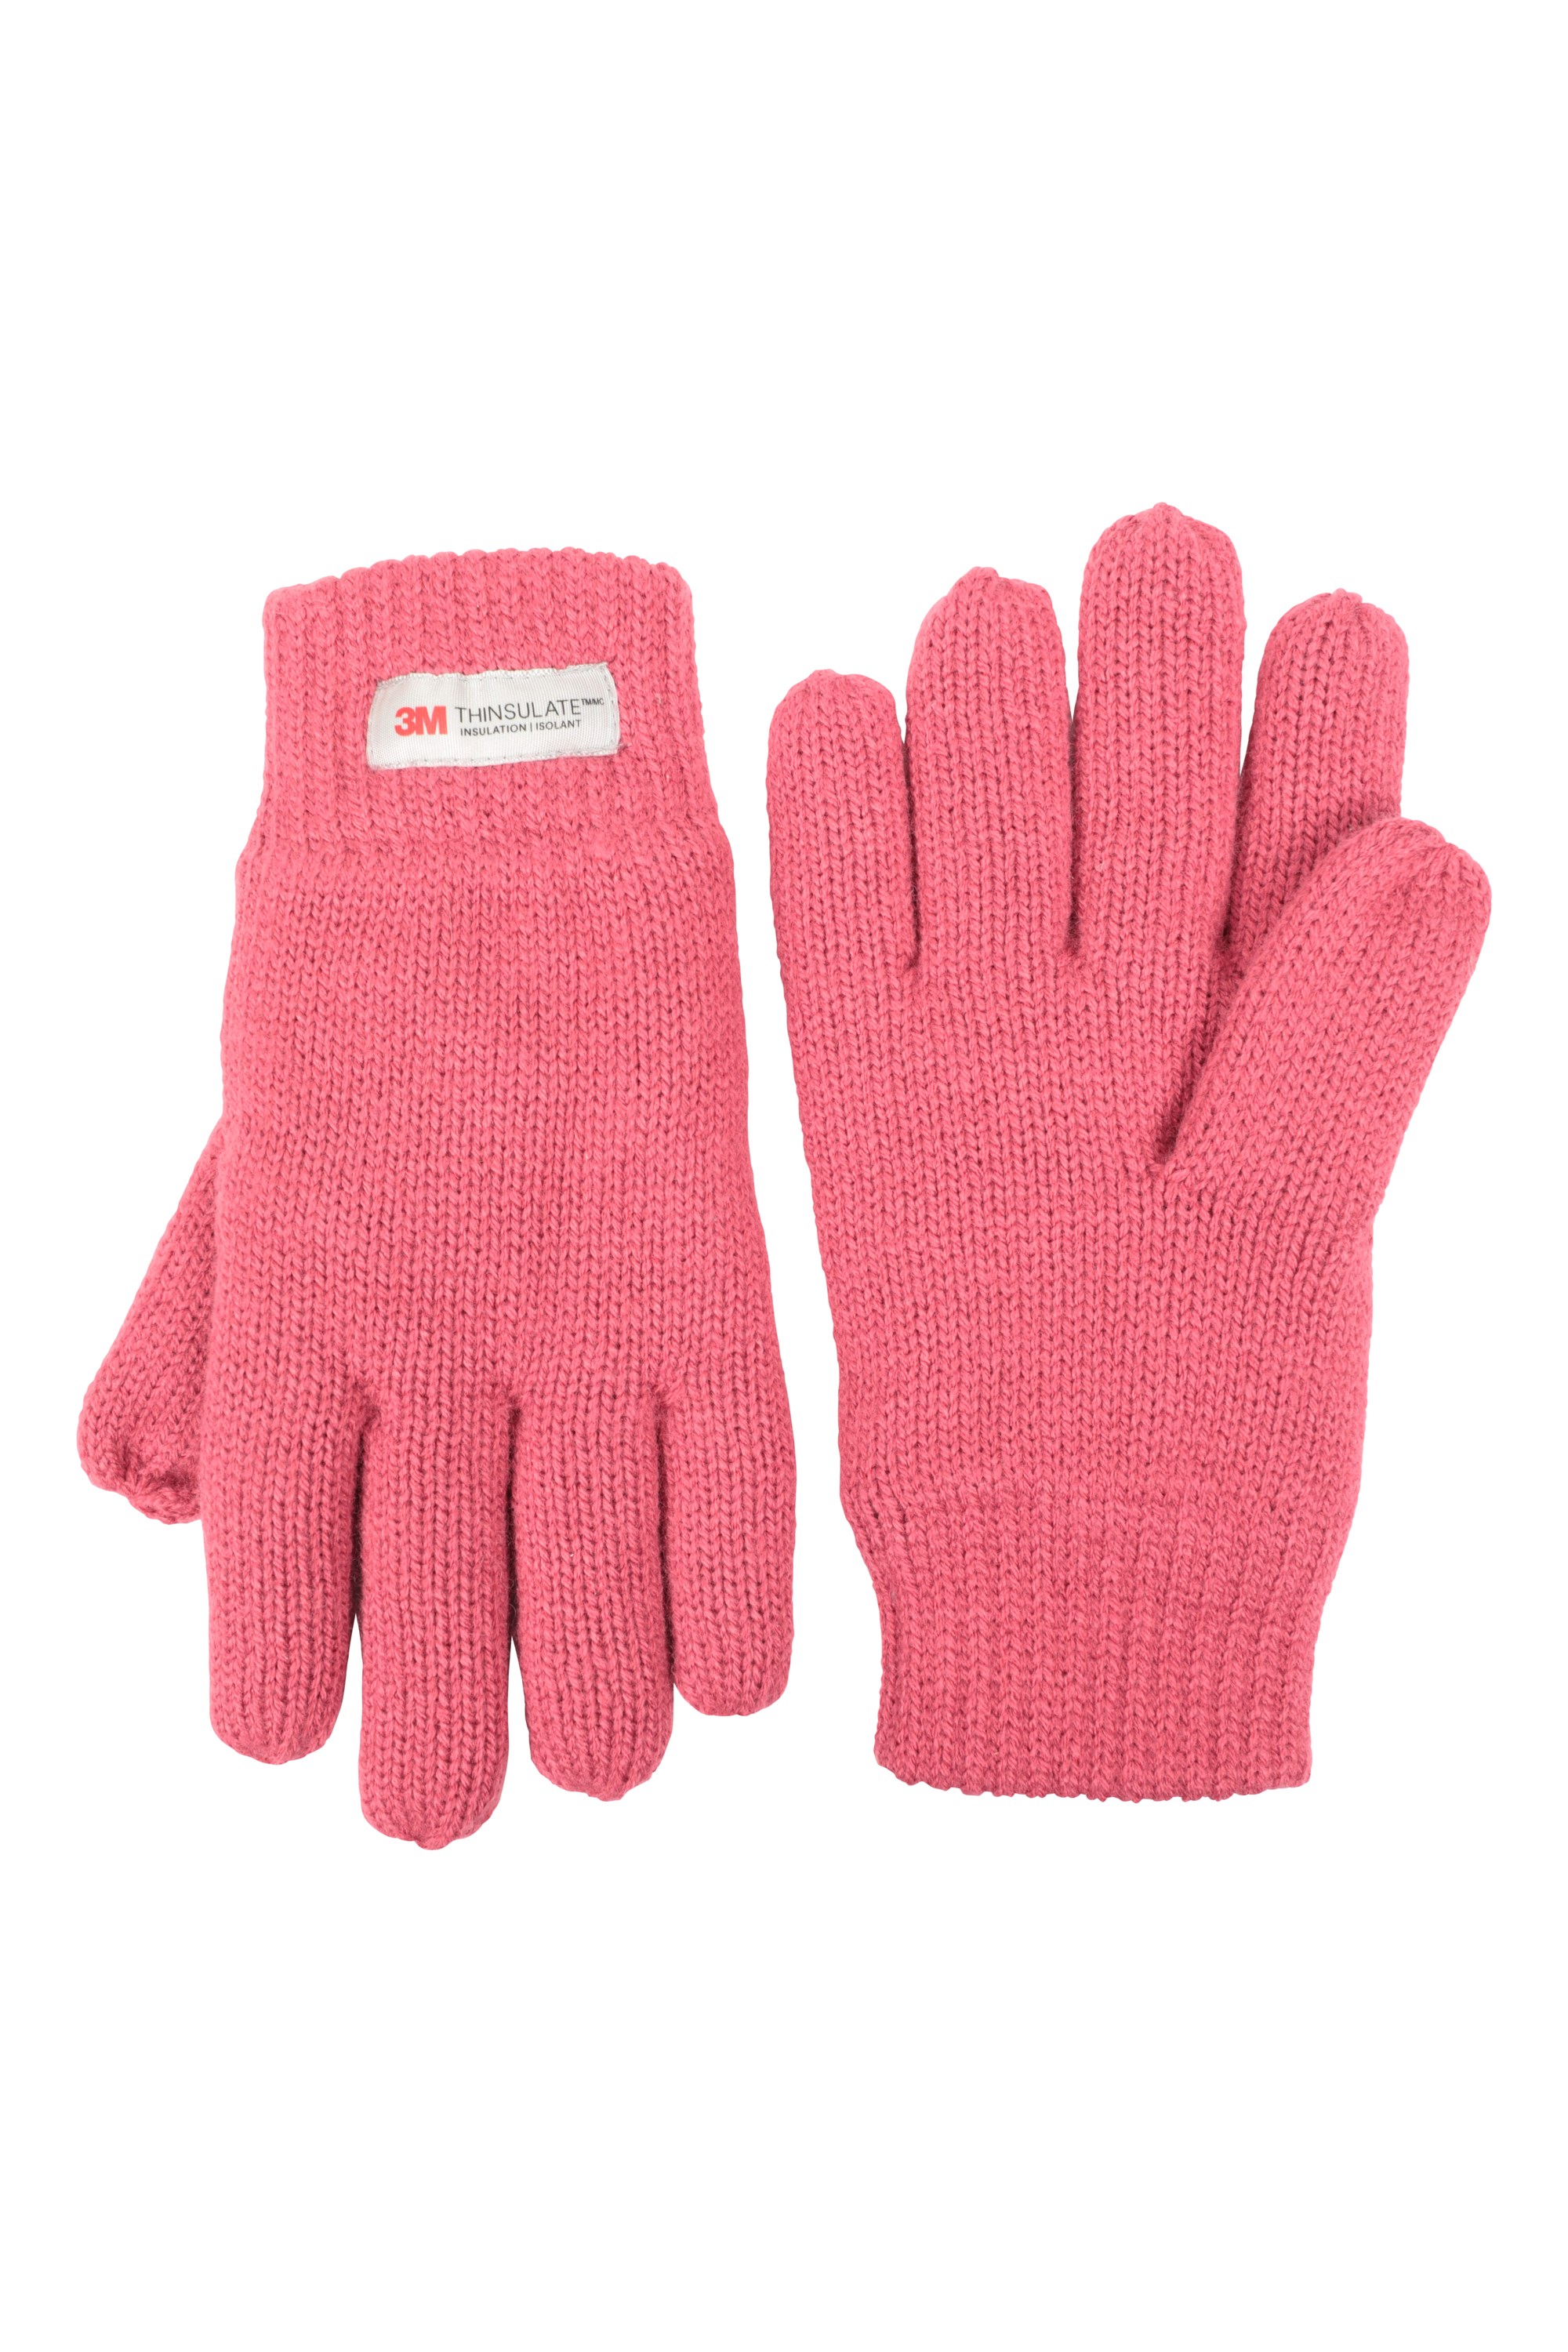 Kids Knitted Thinsulate Thermal Gloves - Pink